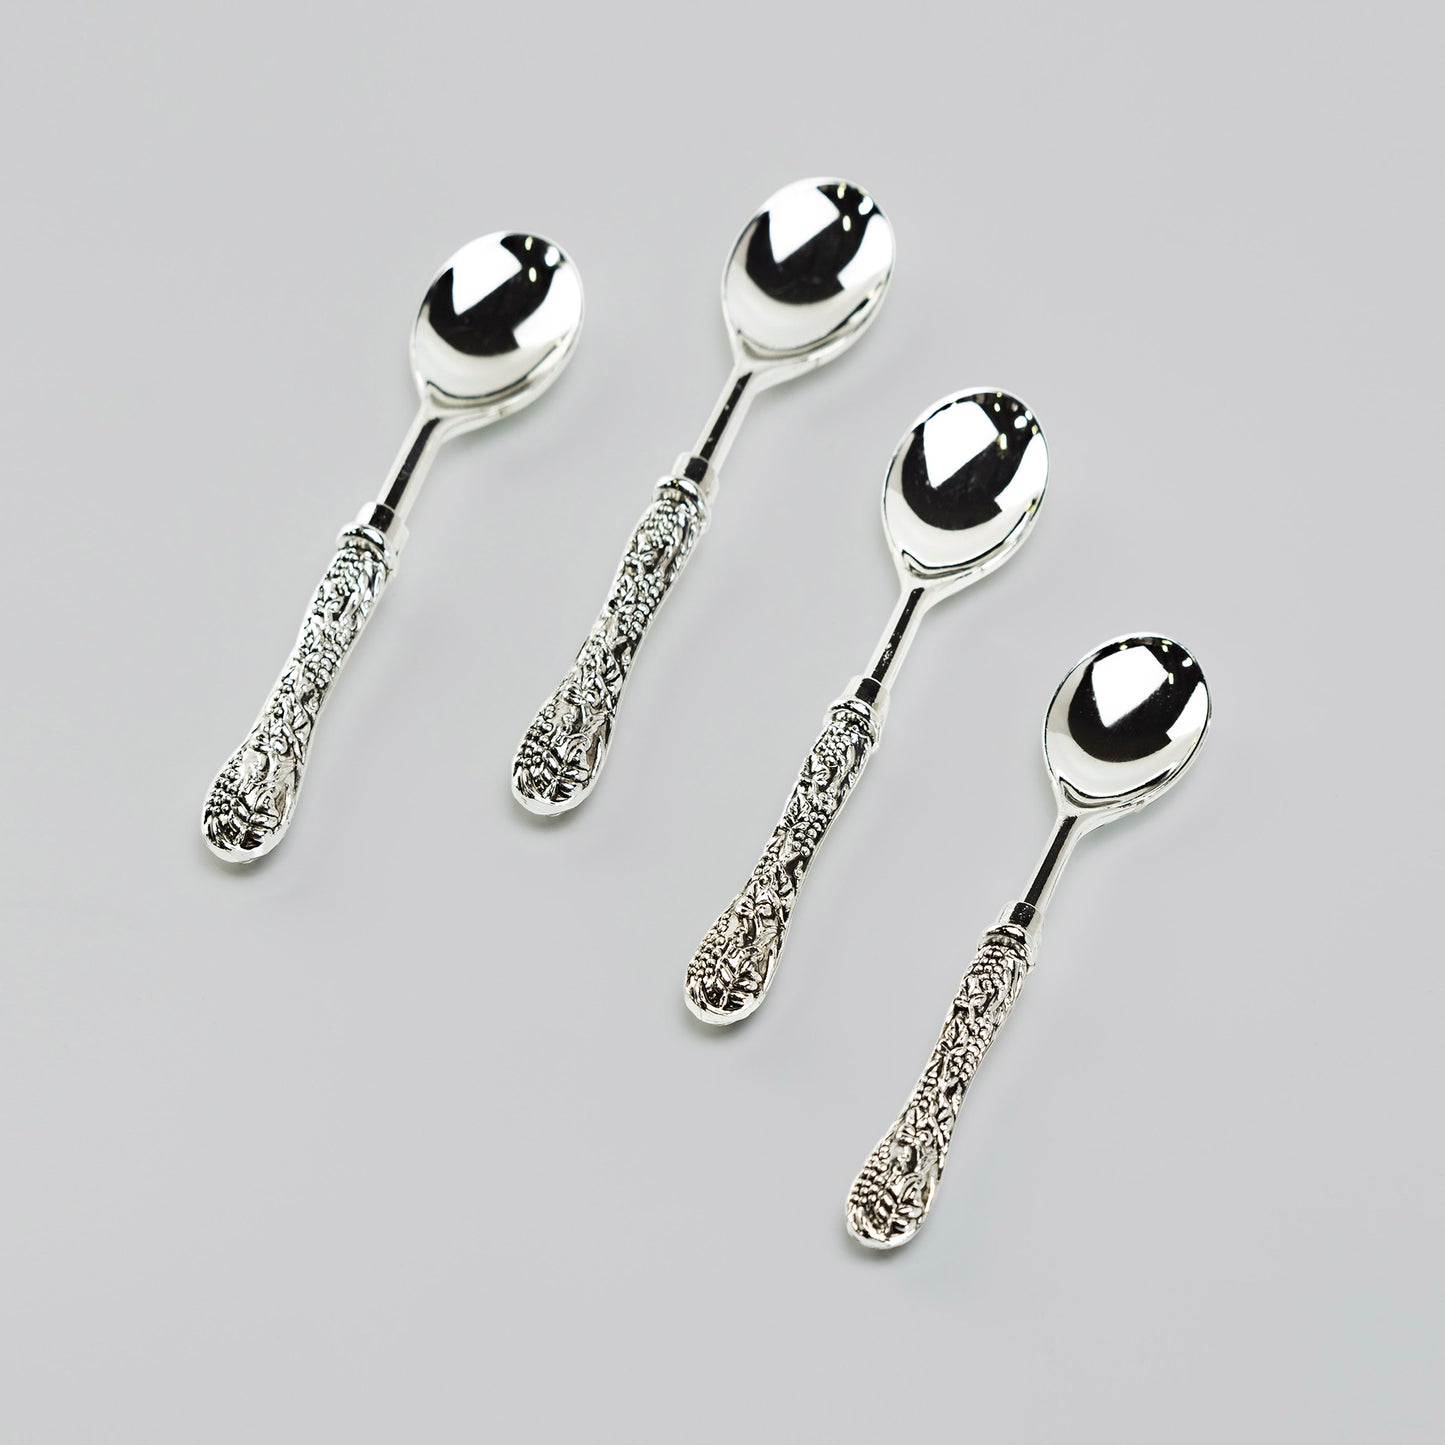 Silver Plated Demi Spoon Set of 4 with Antique Grape Handle Design